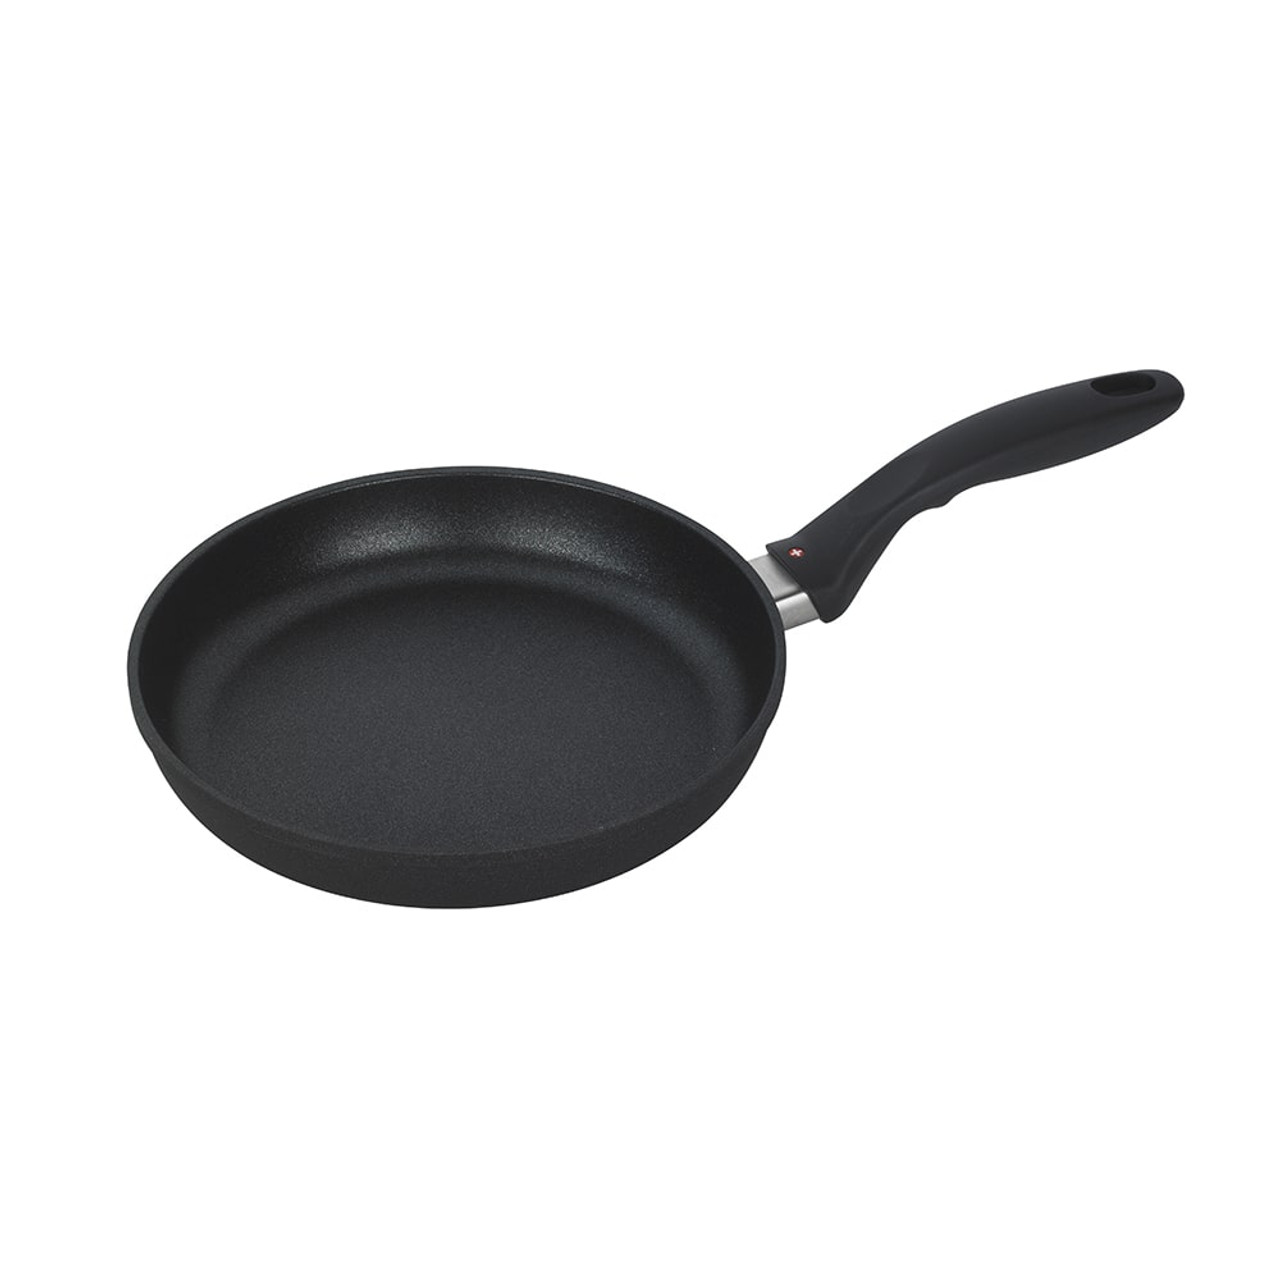 https://cdn11.bigcommerce.com/s-hccytny0od/images/stencil/1280x1280/products/3628/12933/swiss-diamond-xd-nonstick-fry-pan-9in__25246.1601483226.jpg?c=2?imbypass=on